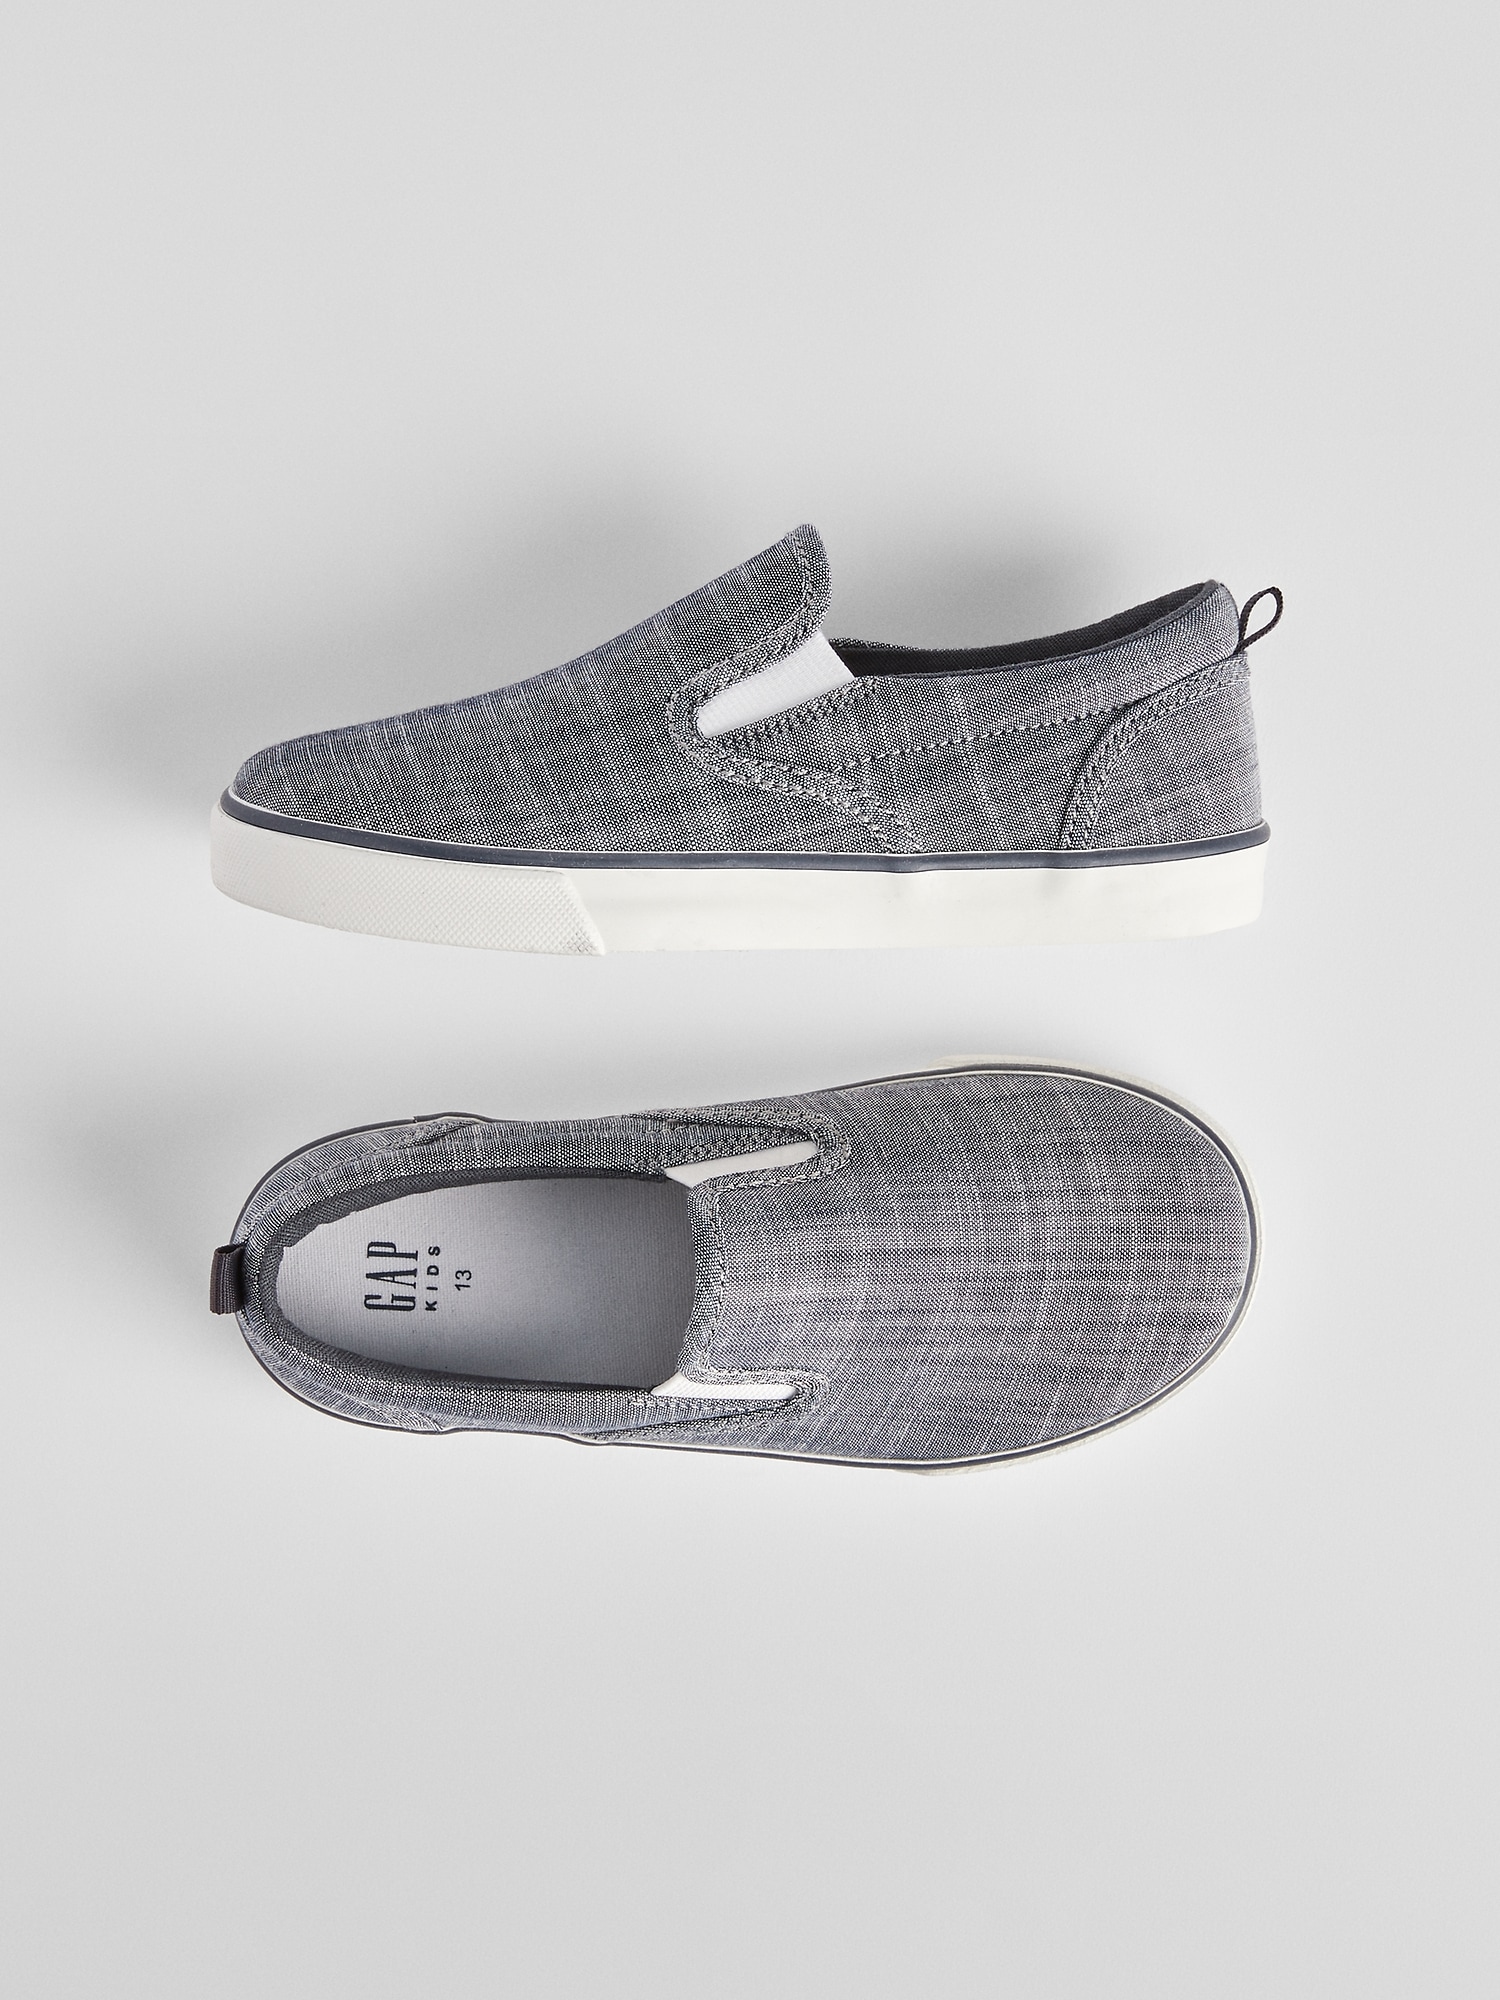 Kids Chambray Slip-On Sneakers | Gap Factory